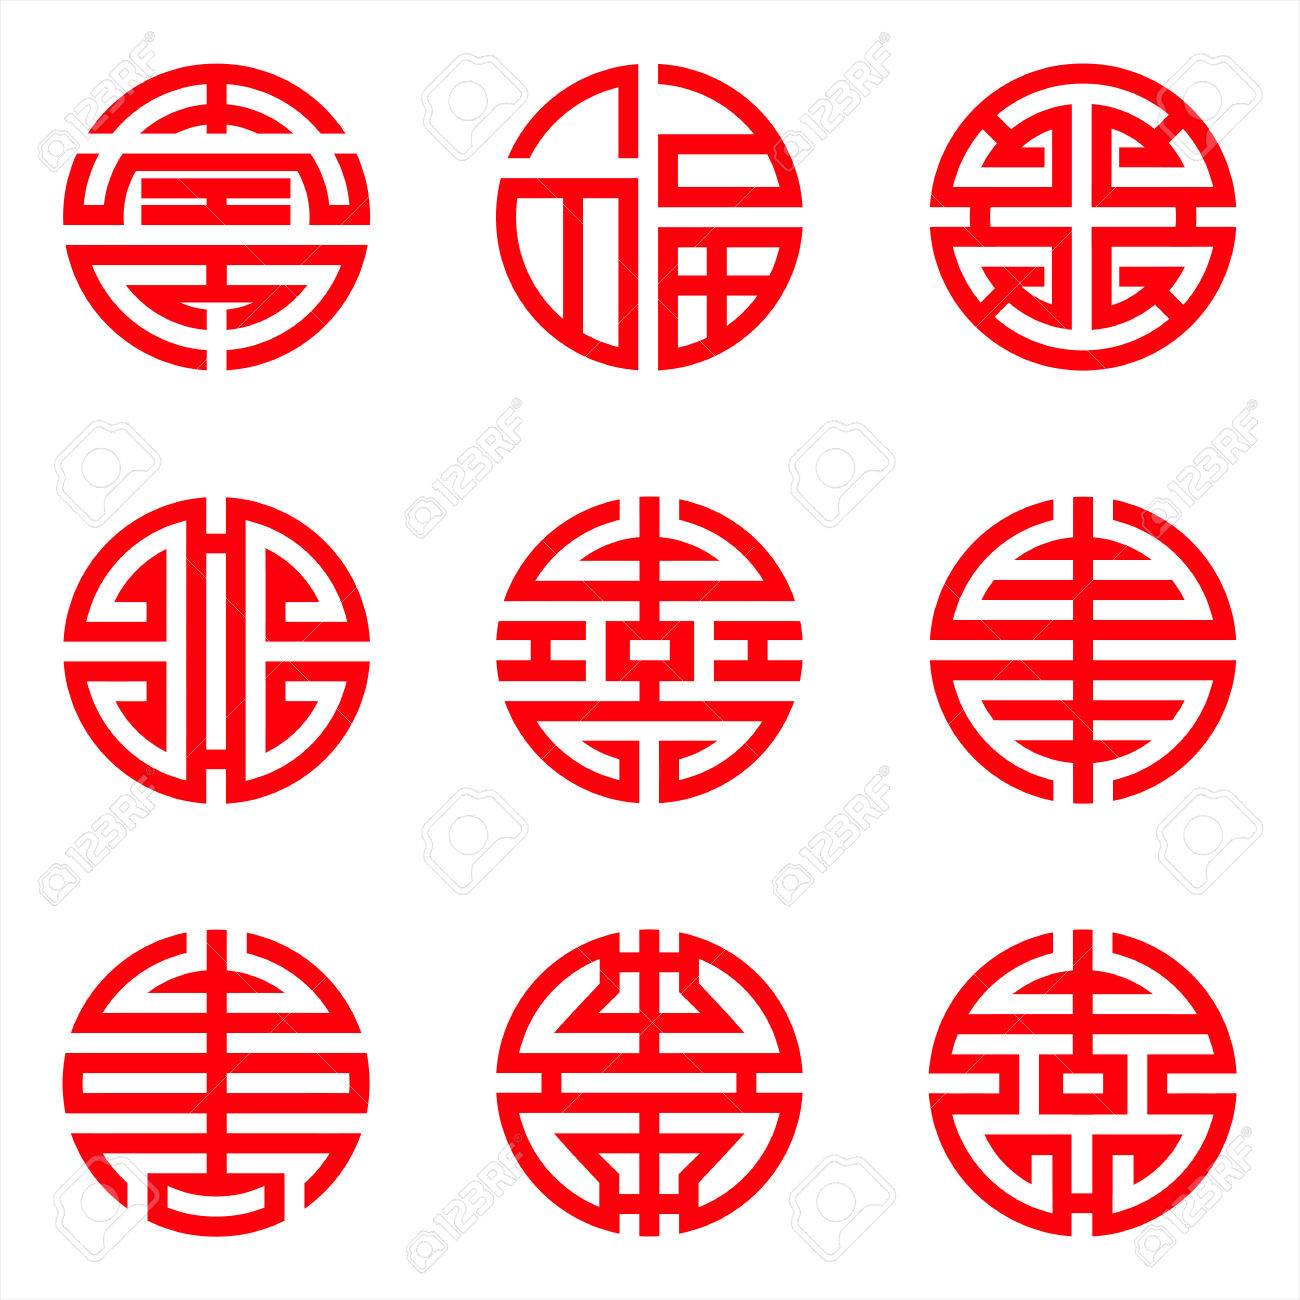 Traditional Chinese lucky symbols for blessing people having a long-life  Stock Vector - 68402404